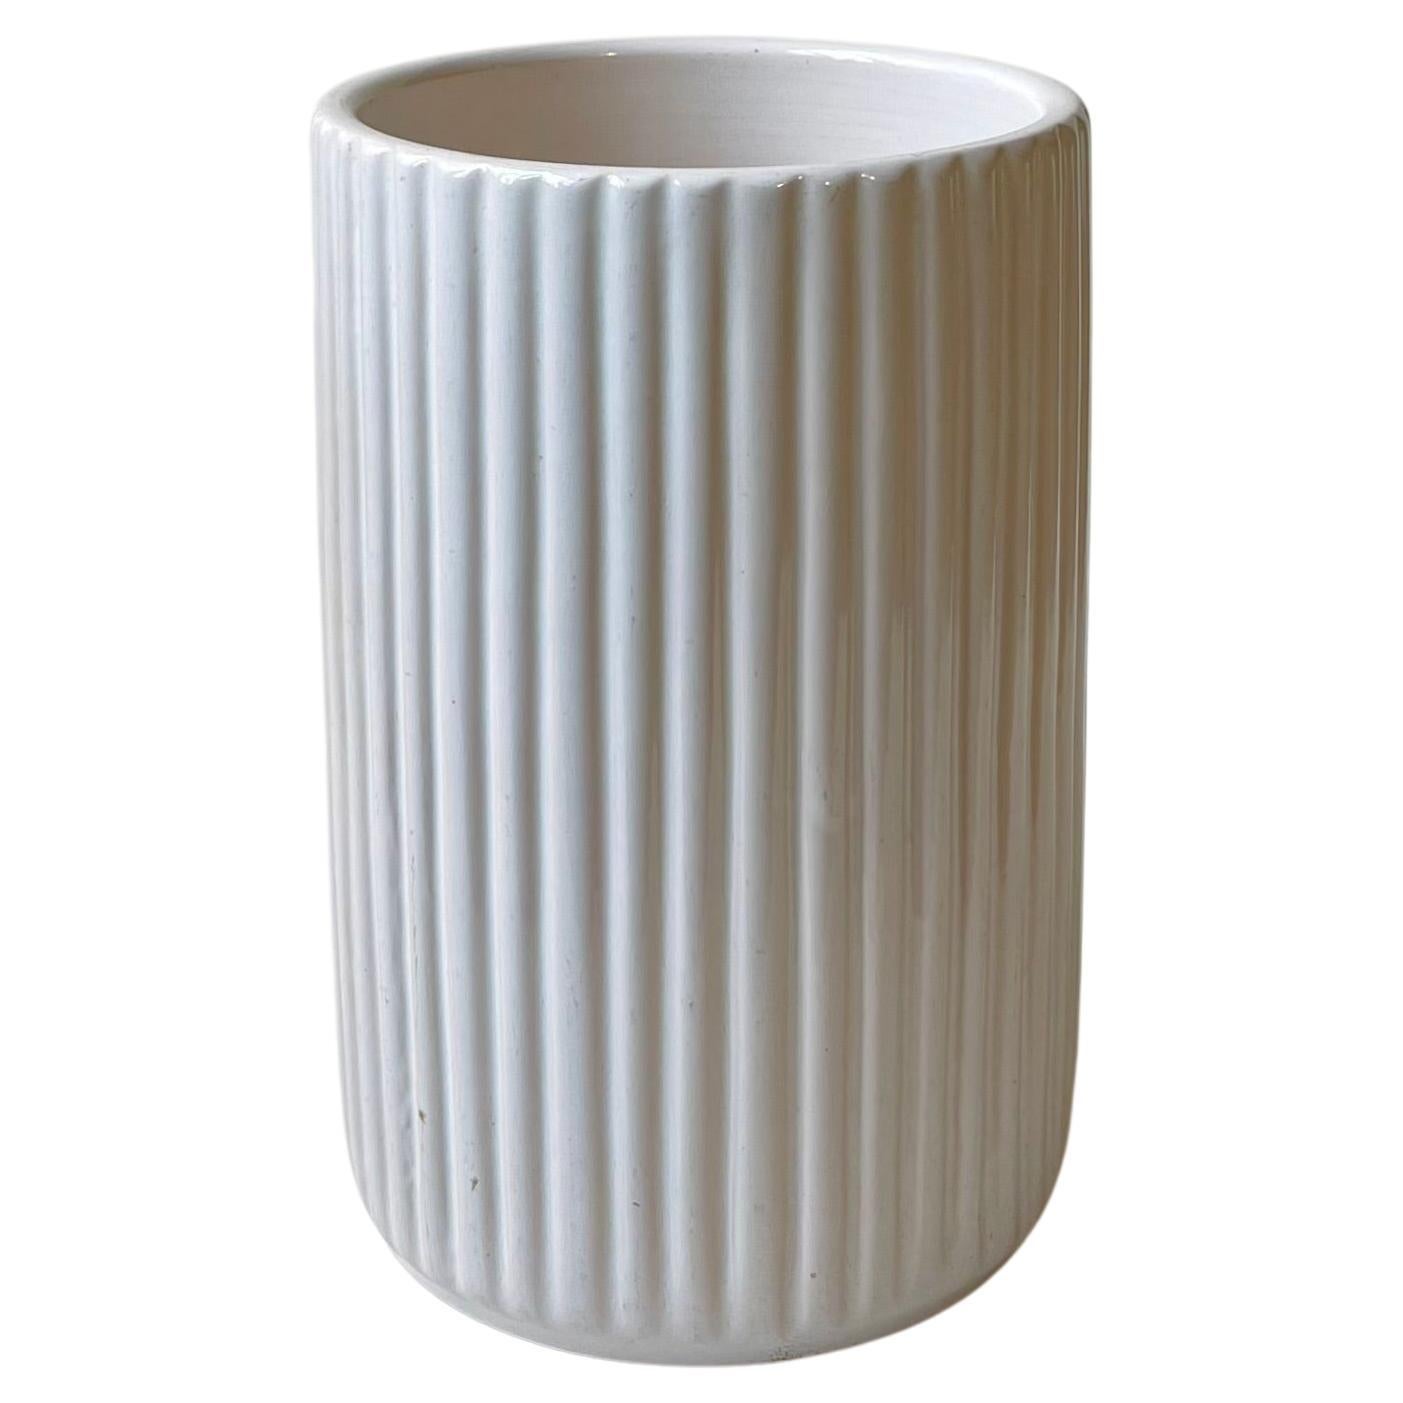 Fluted Architectural Ceramic Vase in White Glaze by L. Hjorth, 1940s For Sale